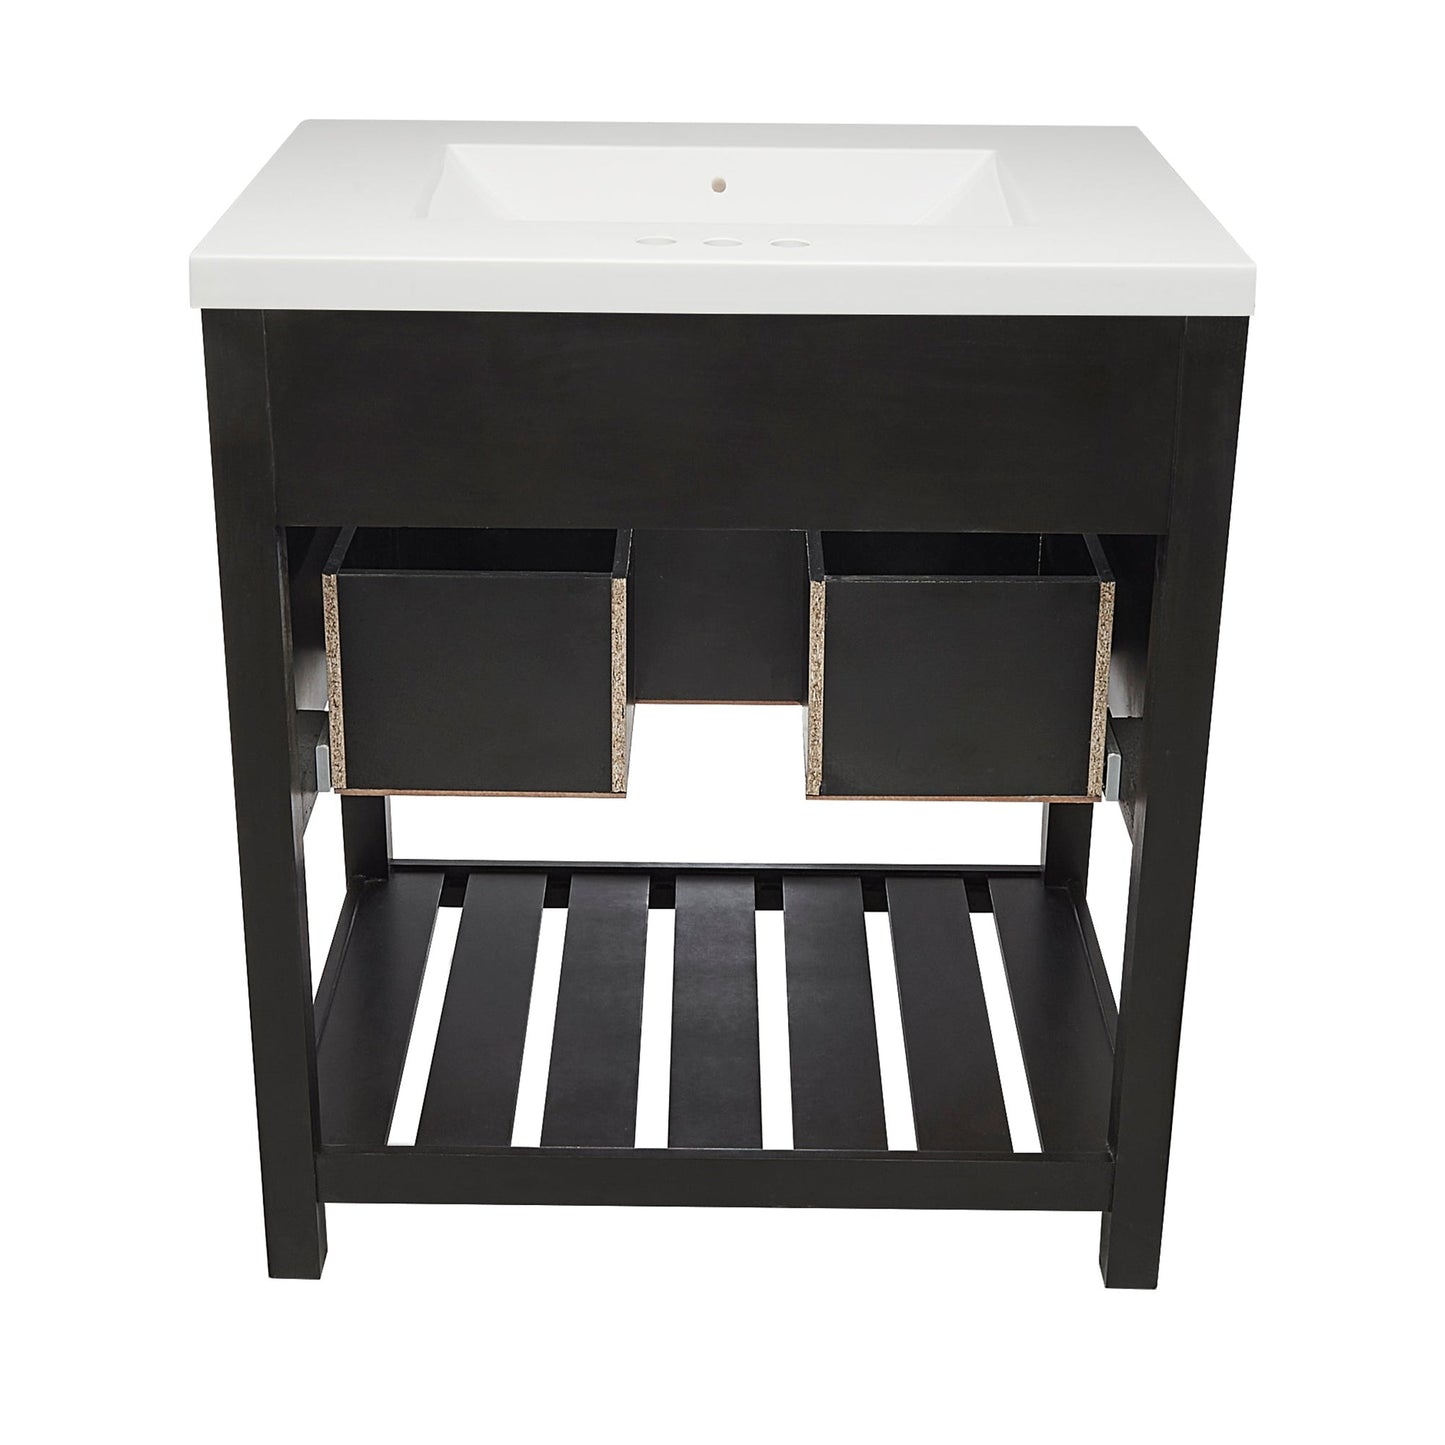 Ella's Bubbles Tremblant 31" Espresso Bathroom Vanity With White Cultured Marble Top and Sink